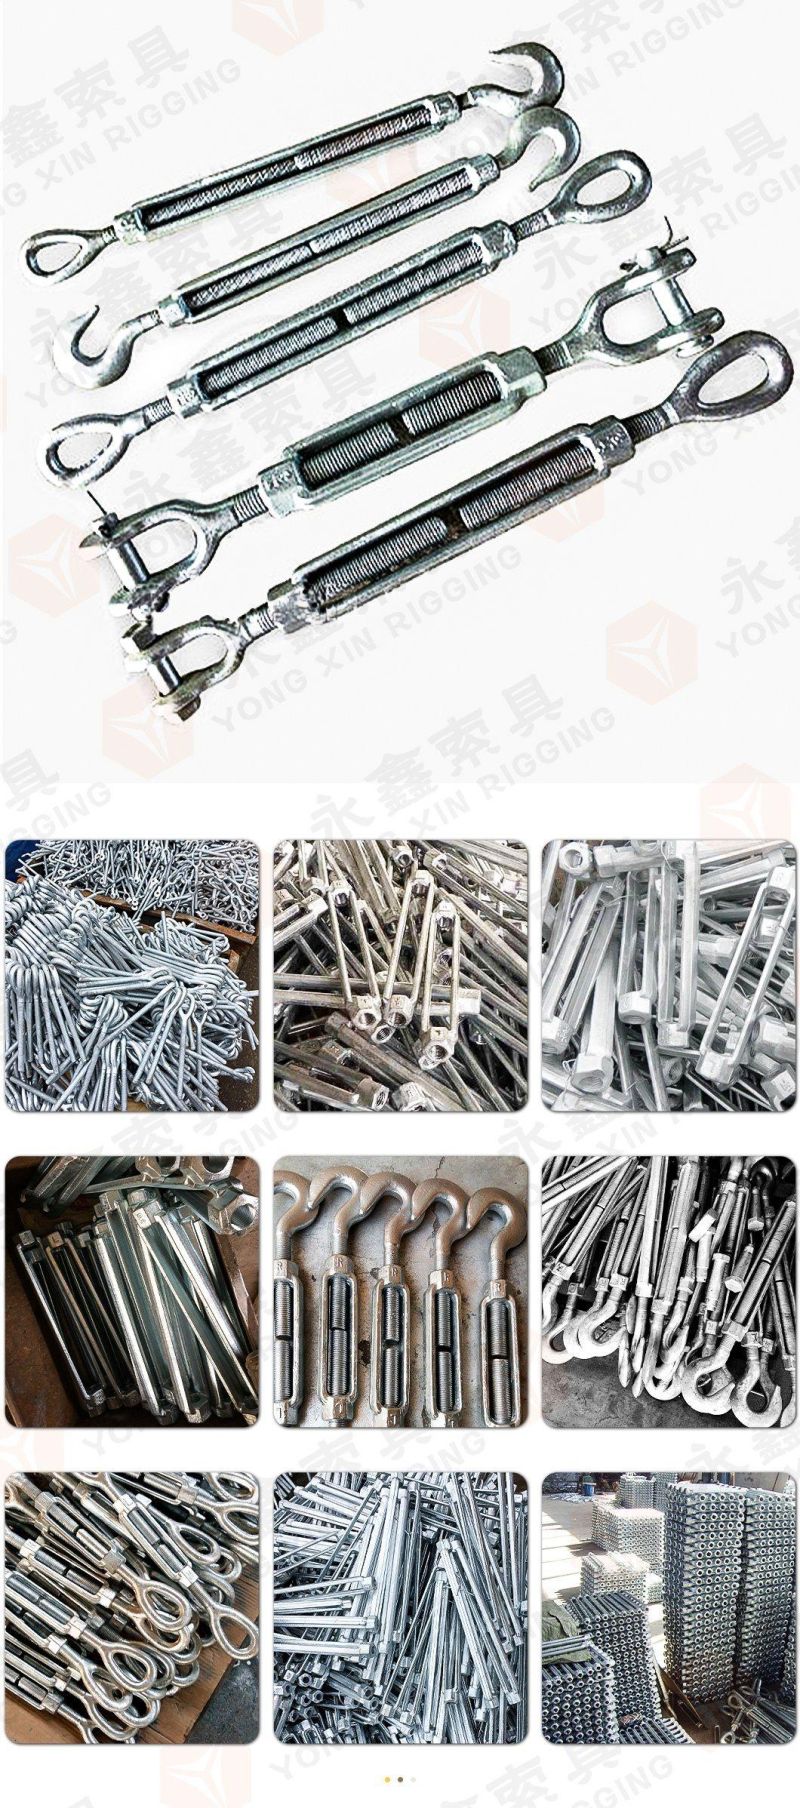 Us Type Wire Rope Turnbuckle Tensioner with Hook and Hook